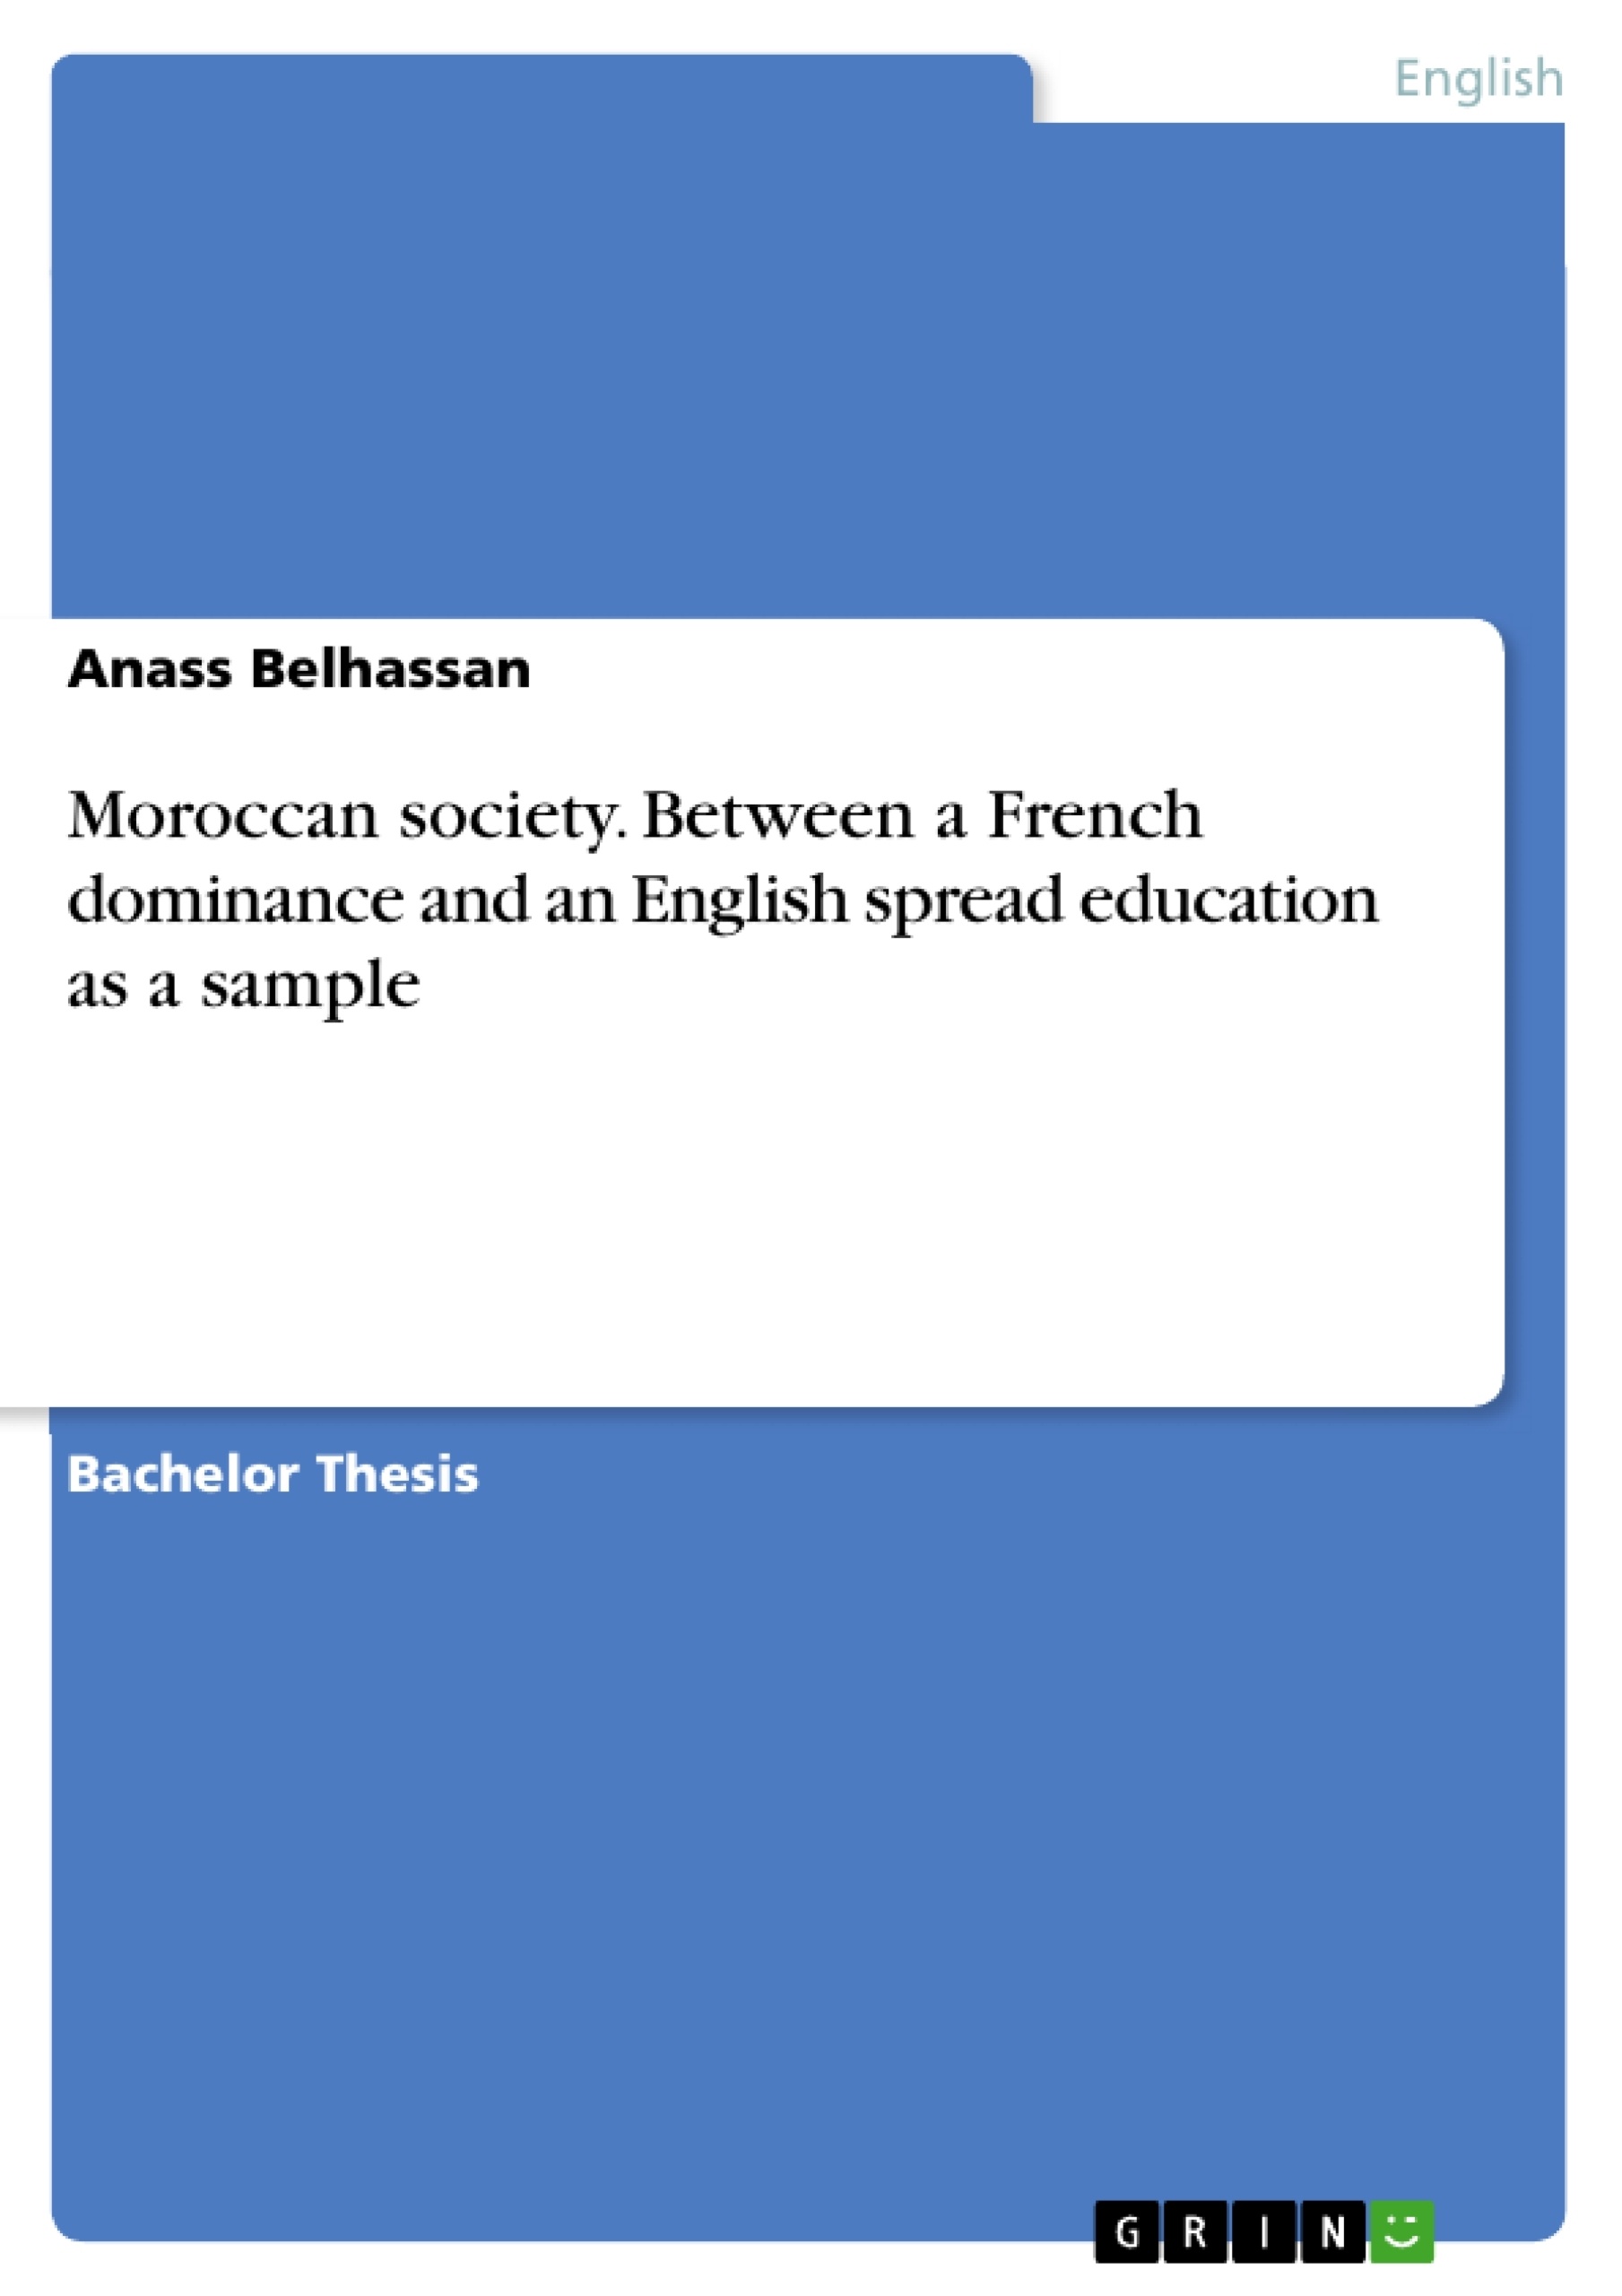 Título: Moroccan society. Between a French dominance and an English spread education as a sample